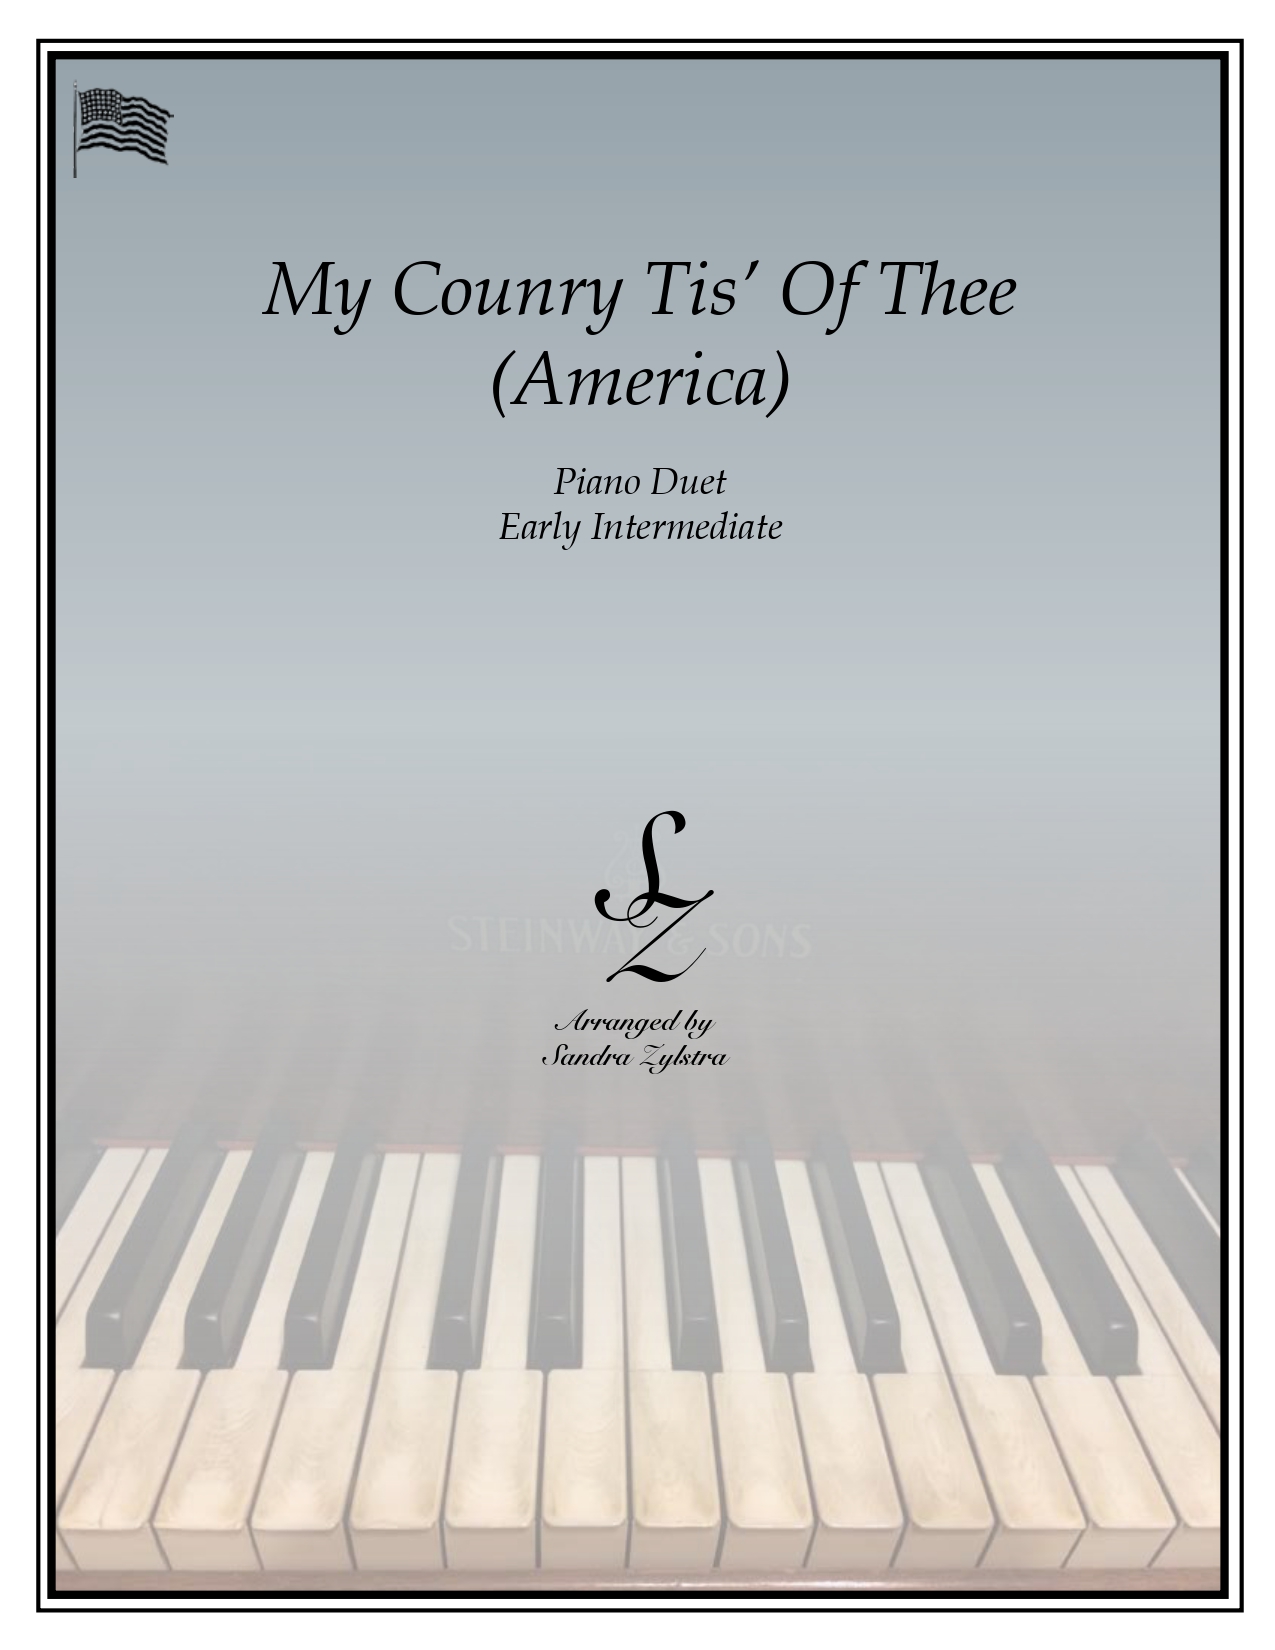 My Country Tis Of Thee early intermediate duet parts cover page 00011